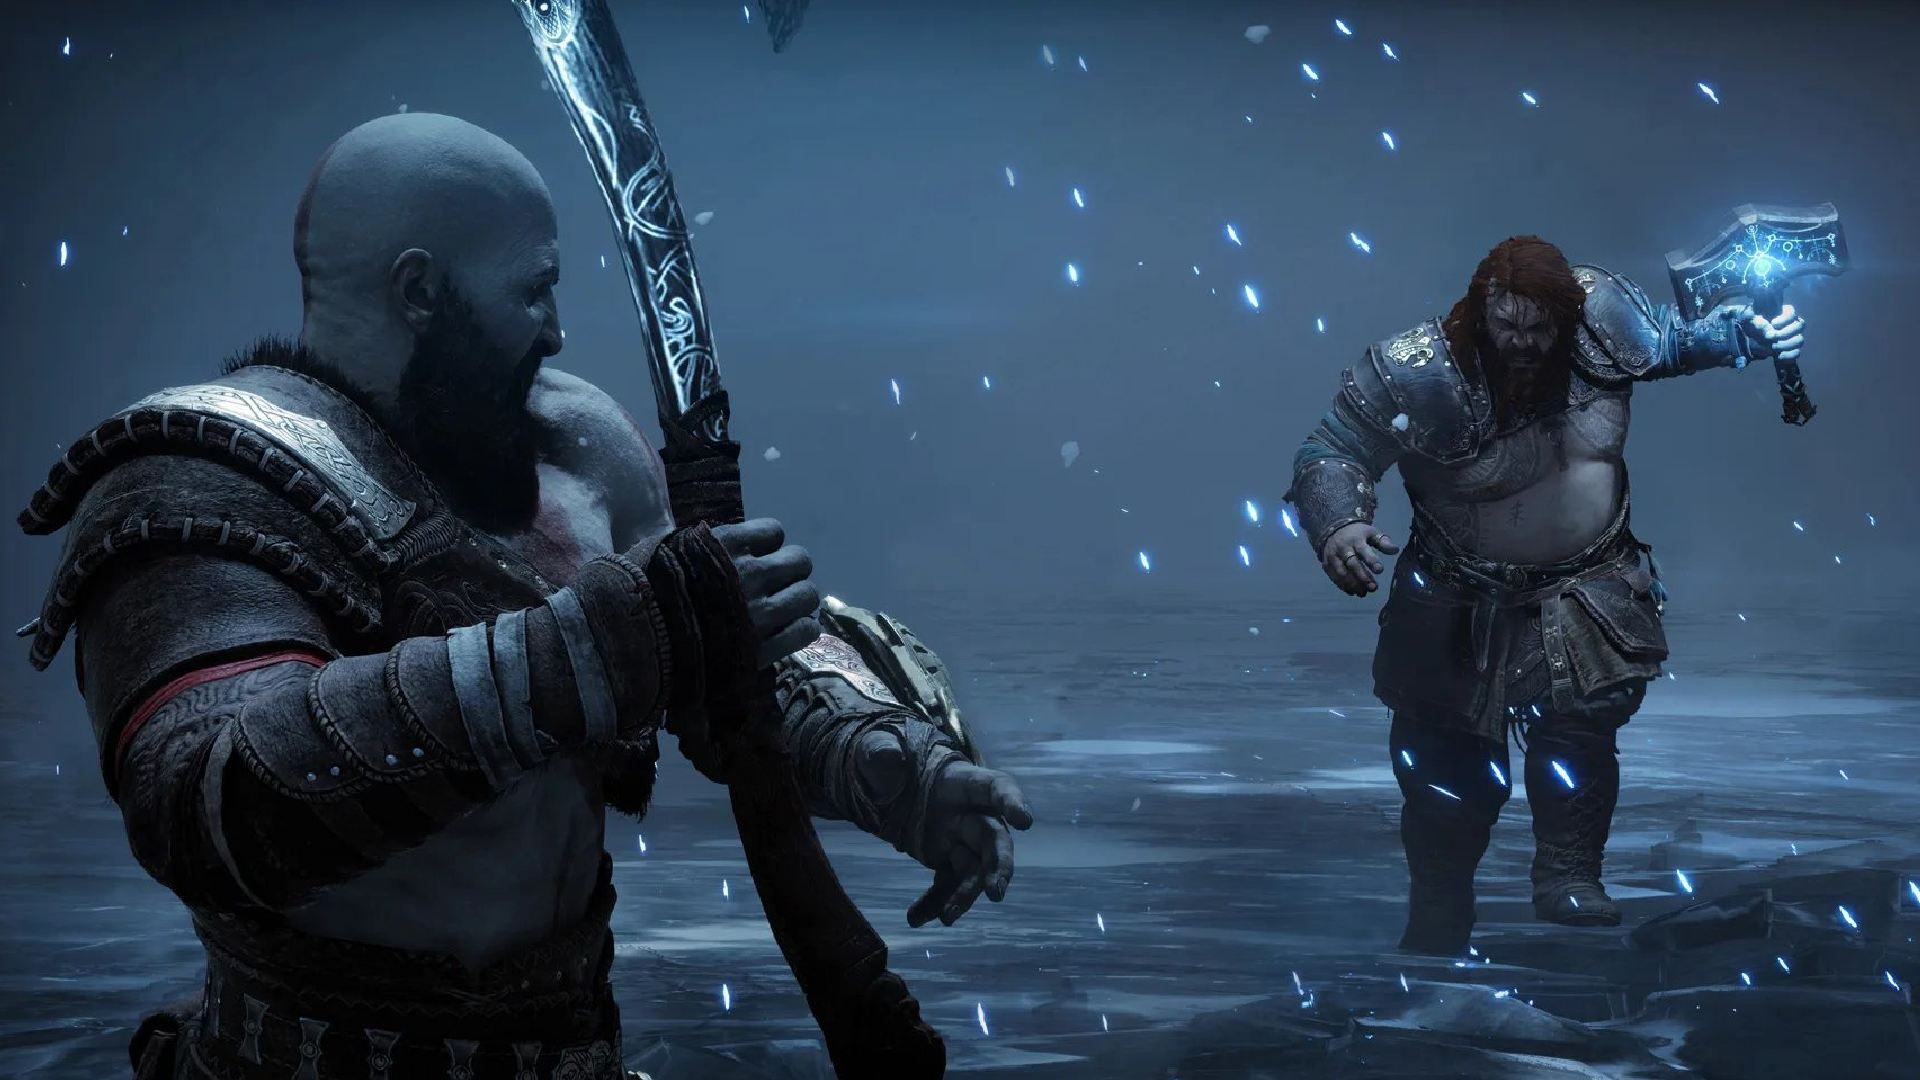 First Lords of the Fallen reviews drop ahead of embargo